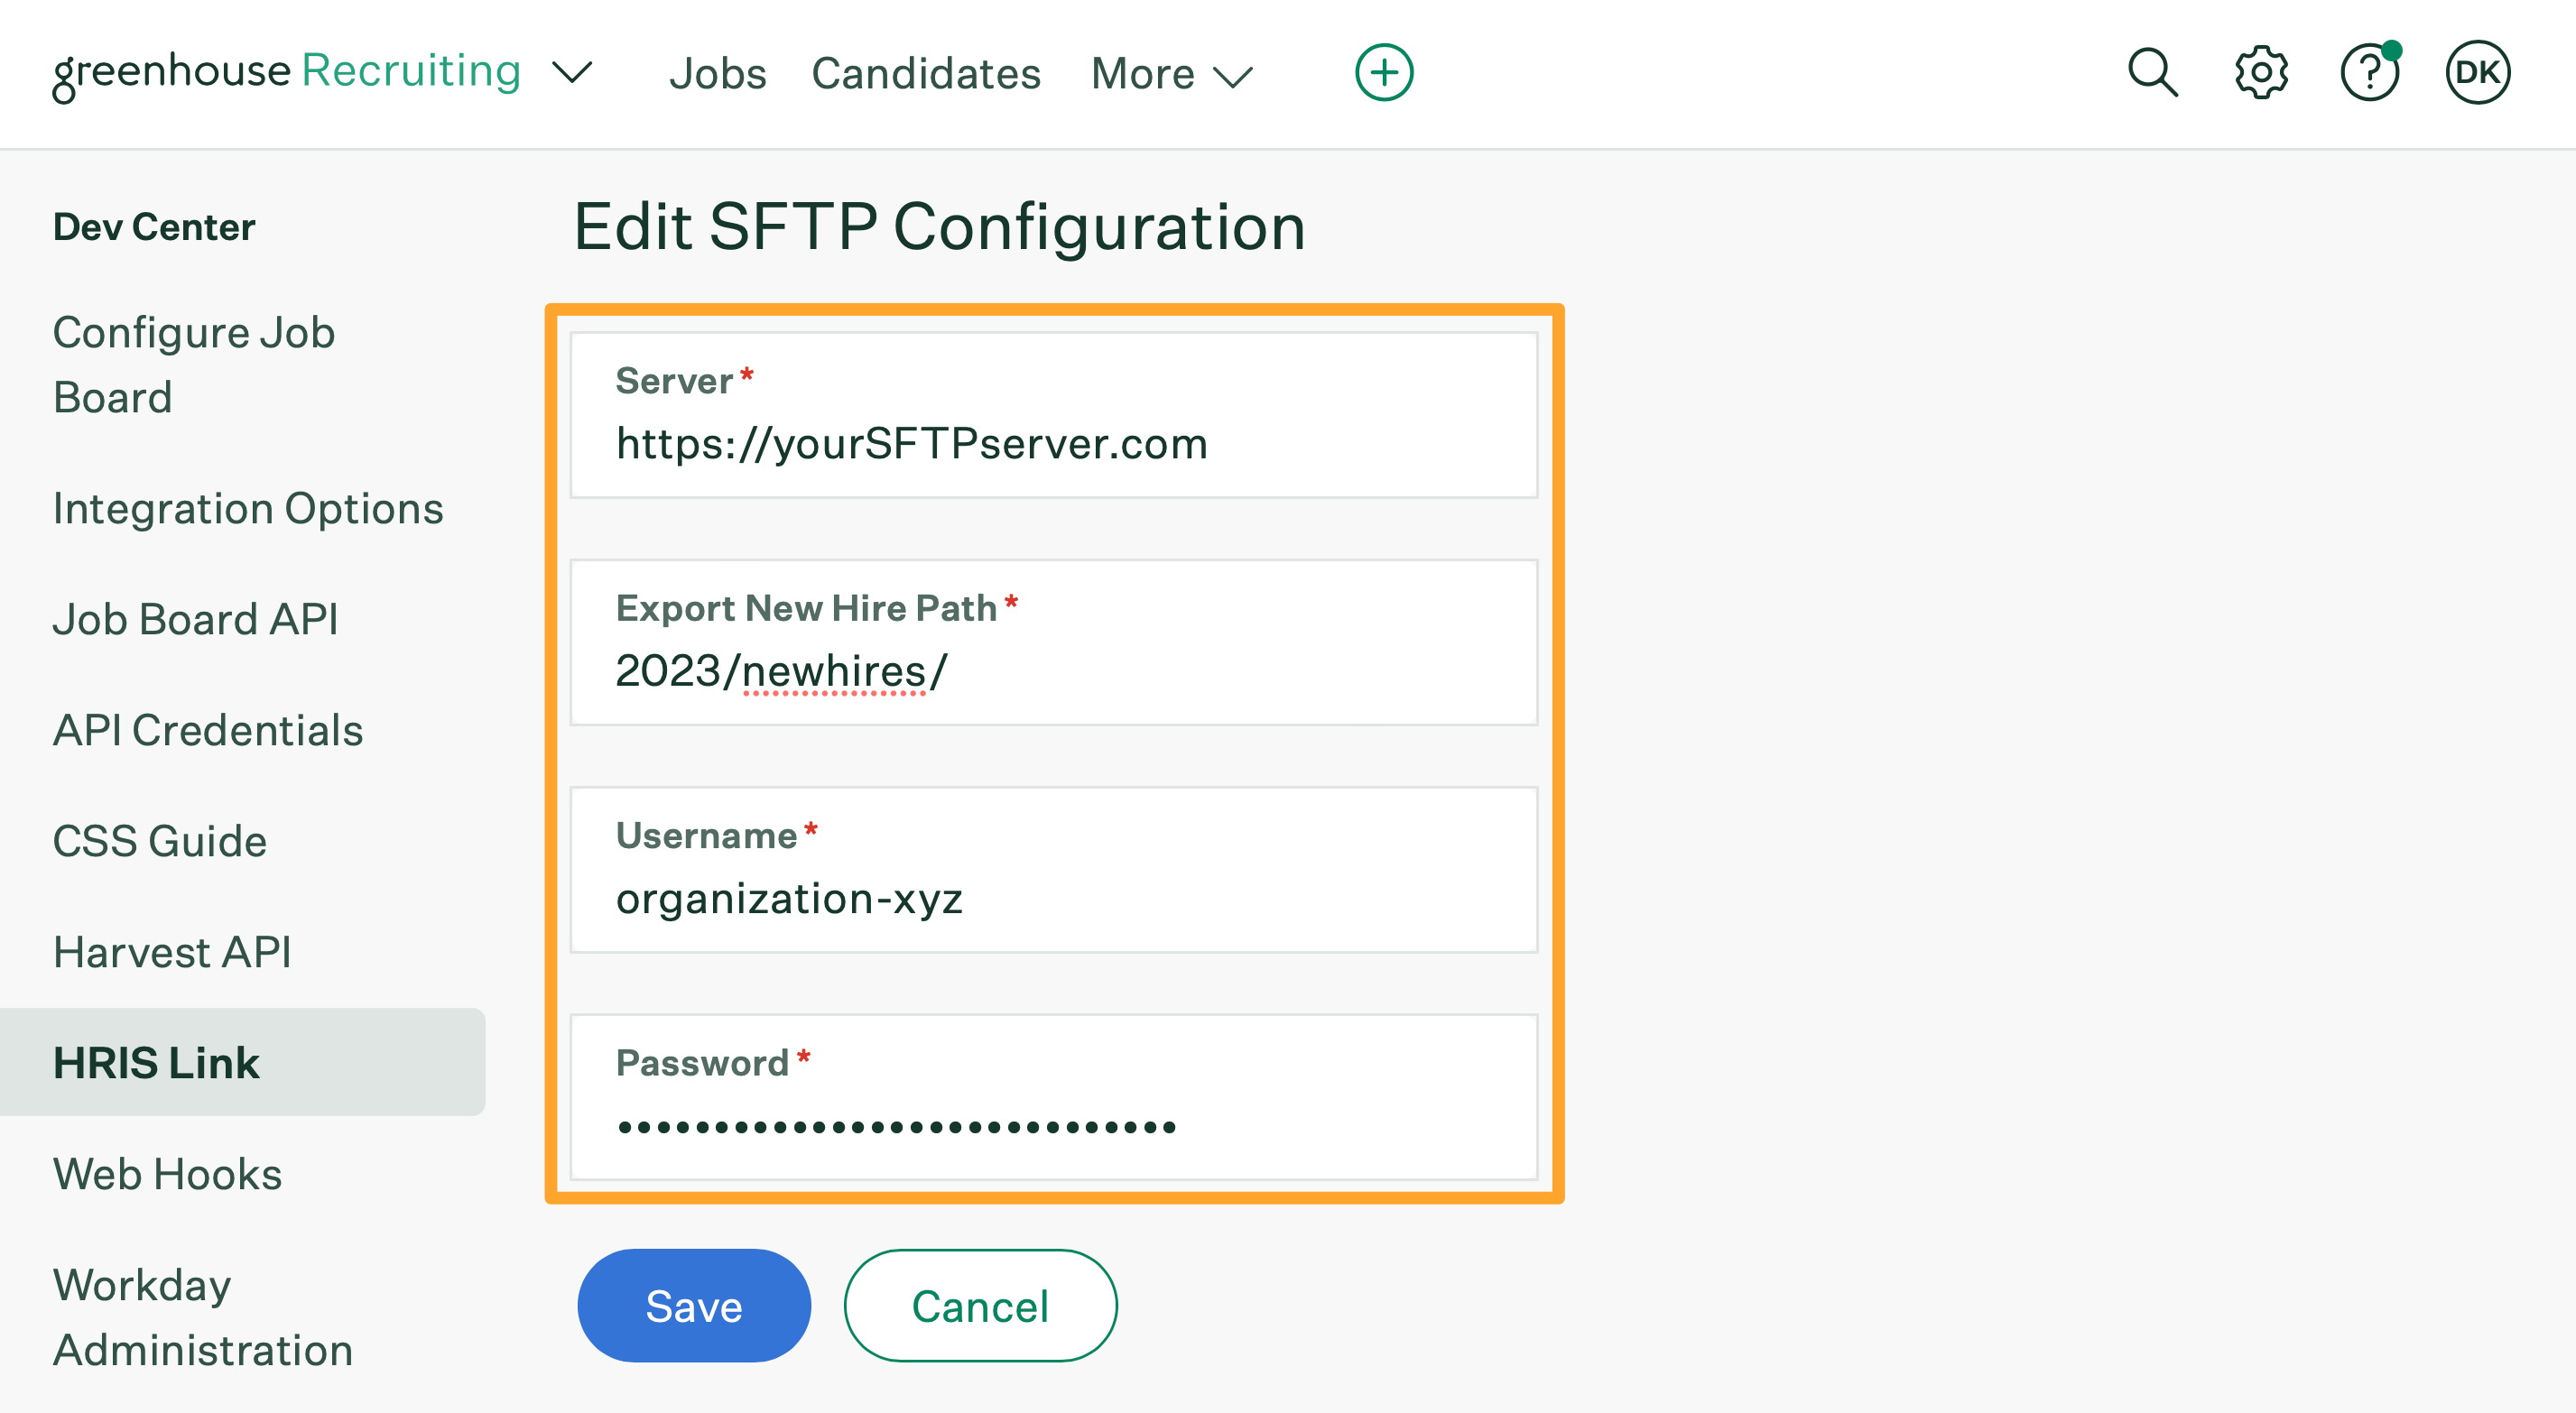 HRIS Link for hired candidates for SFTP shows an example server address, new hire export path, username, and password